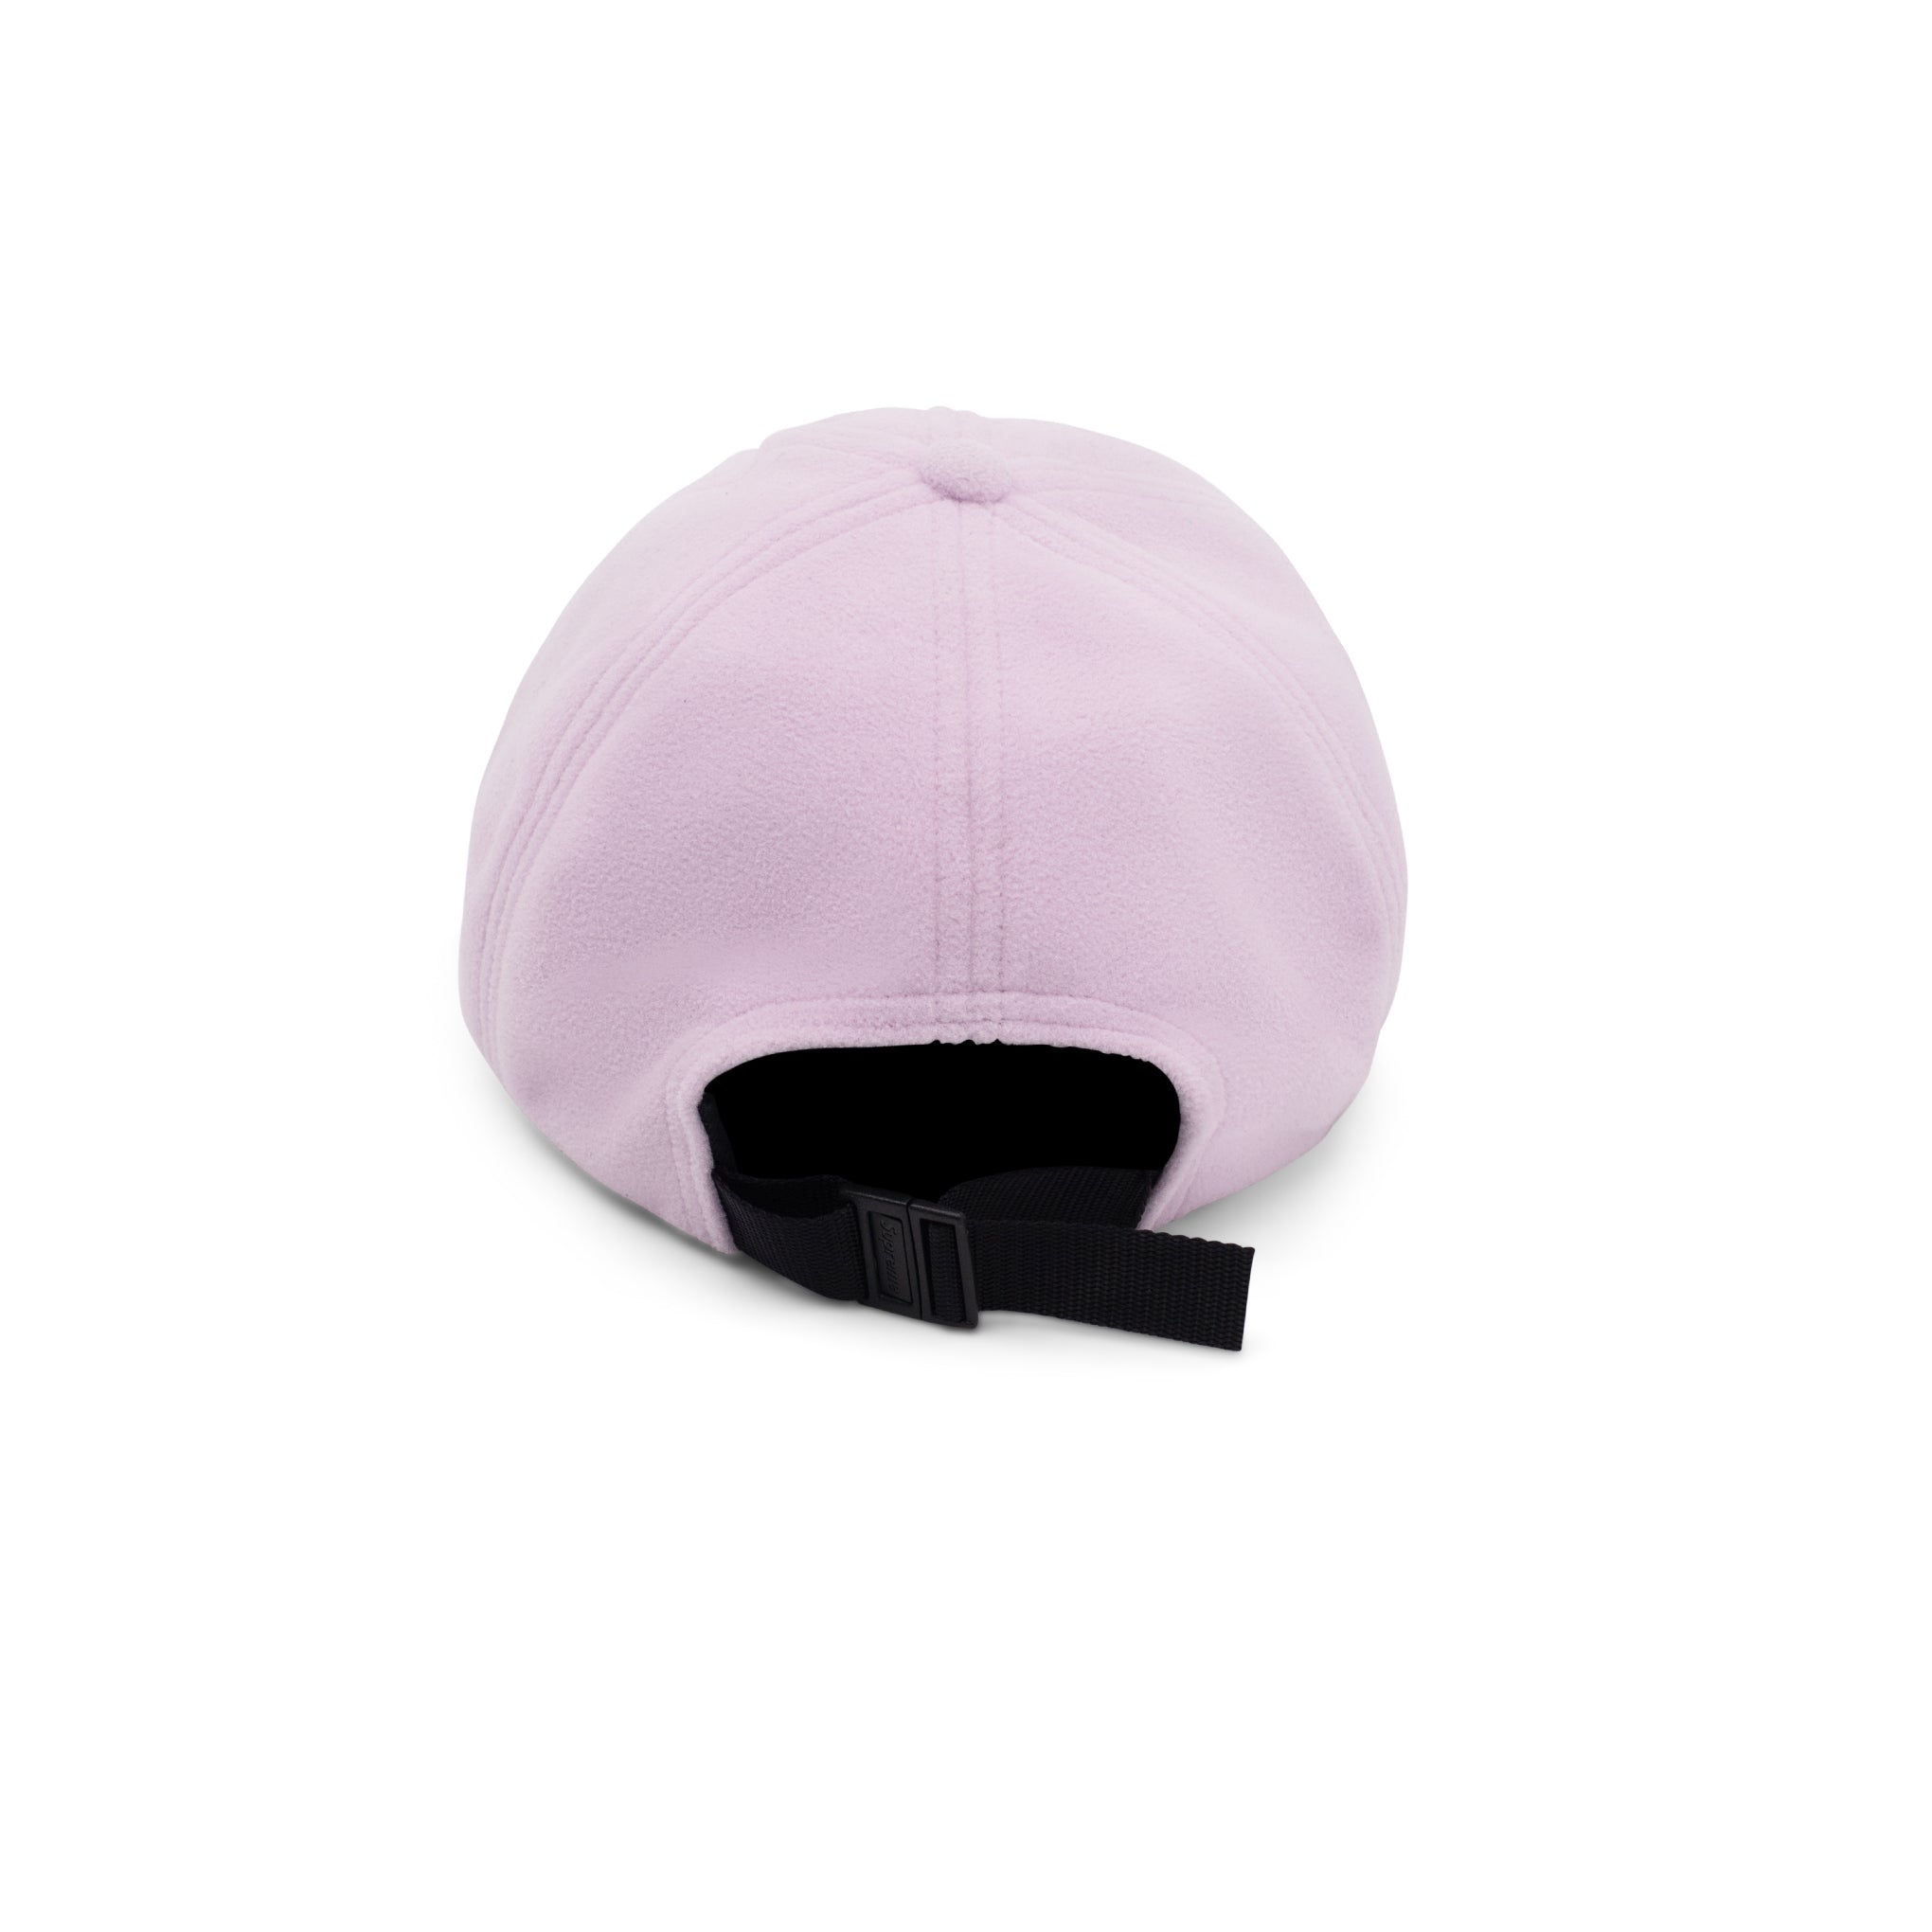 SUPREME WINDSTOPPER SMALL BOX EARFLAP 6 PANEL PINK